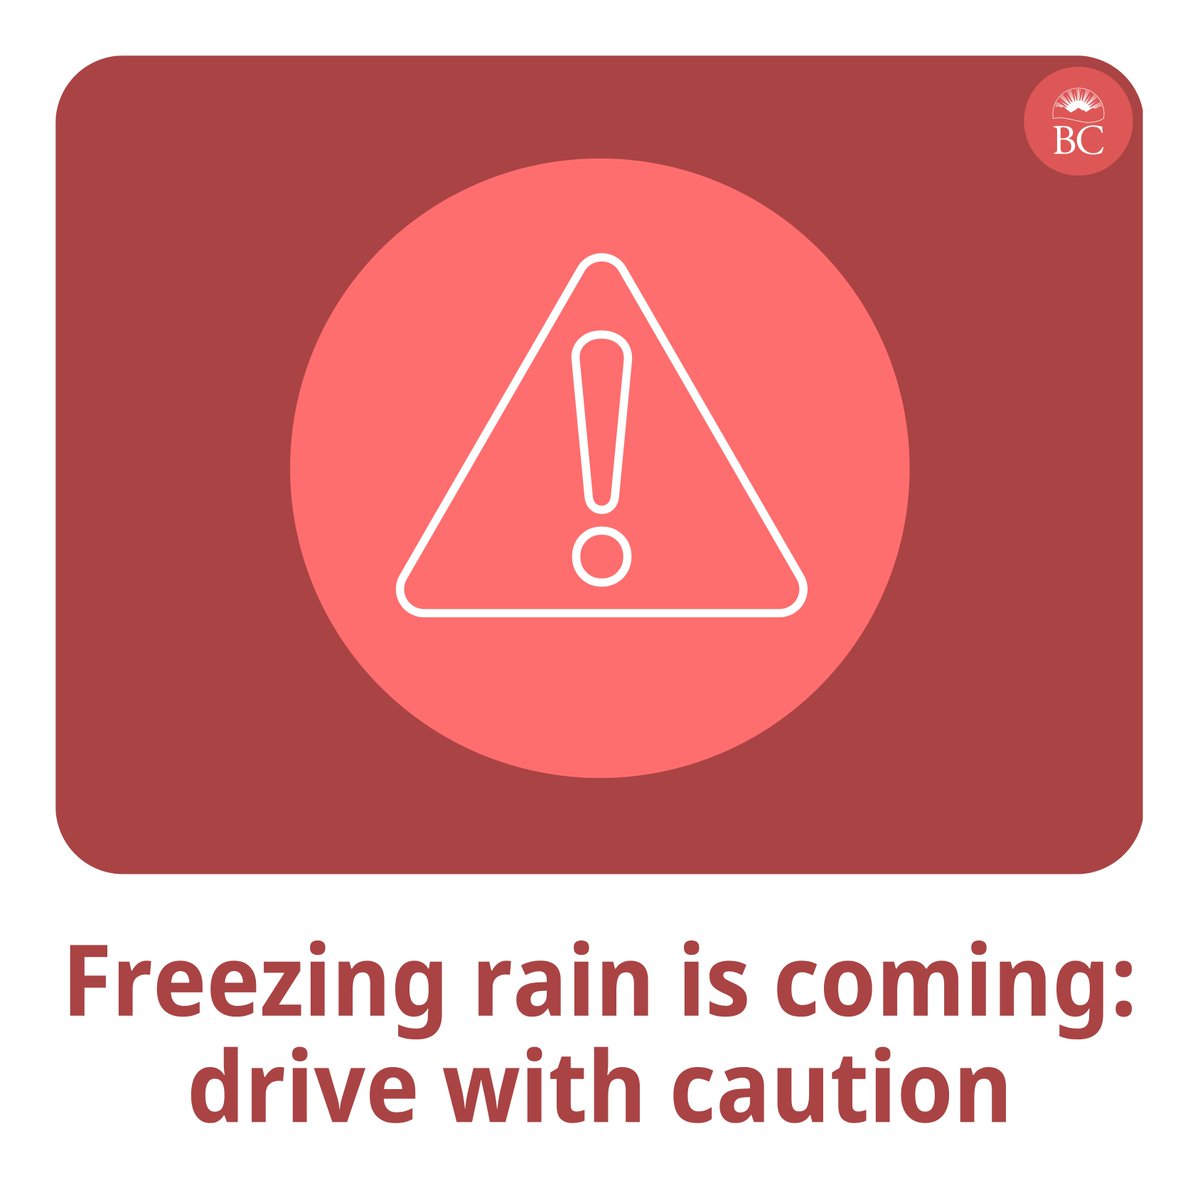 People should prepare for freezing rain and snow in the coming days. Freezing rain conditions may mean that some bridges and roads could close. Take precautions to stay safe: if you must travel use extreme caution. Before you head out, check conditions at DriveBC.ca